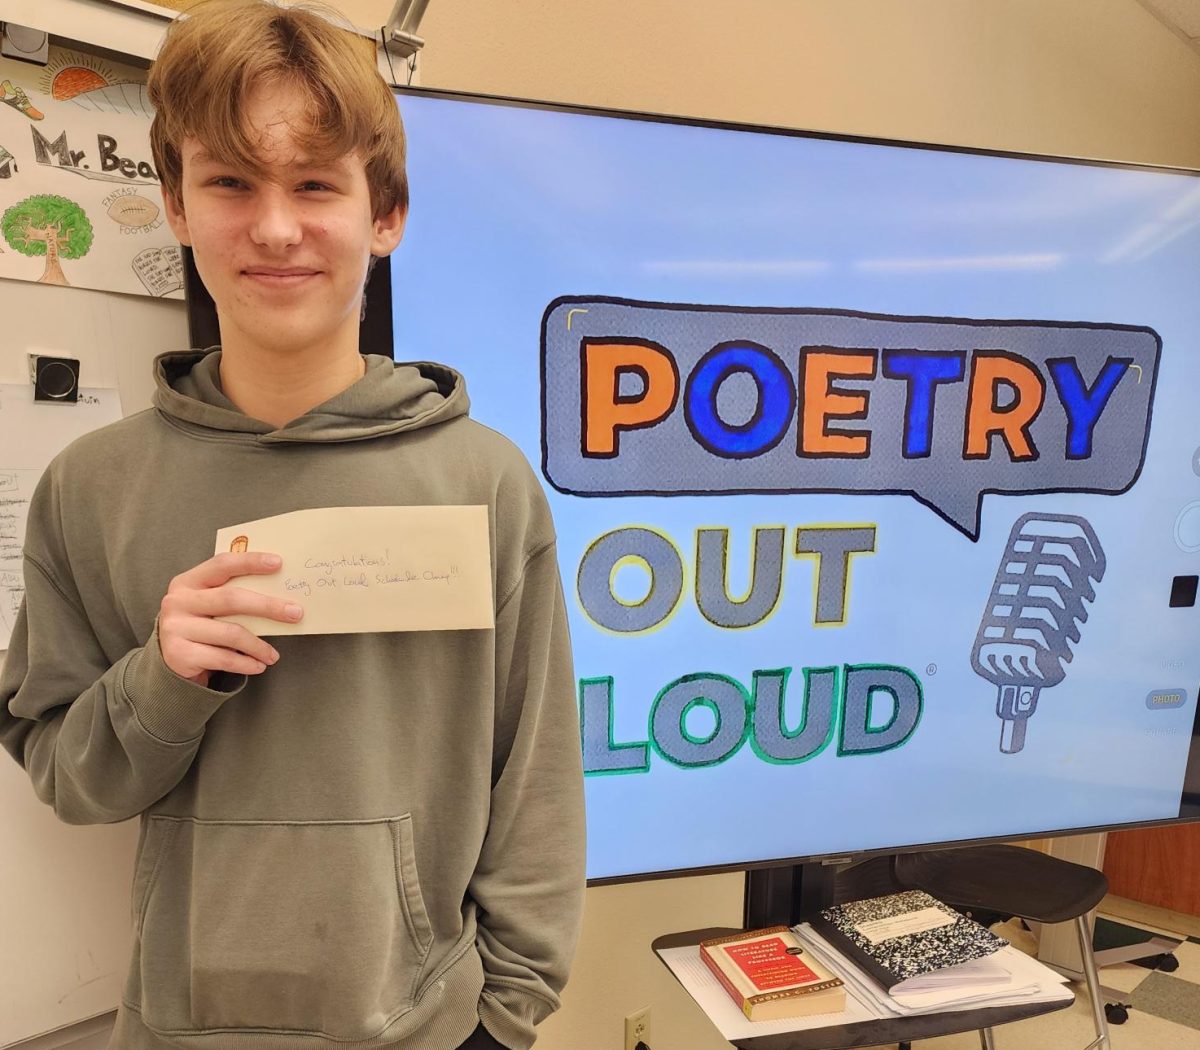 Riley OHara, sophomore, wins first place in Poetry Out Loud contest. He will compete at the county level.